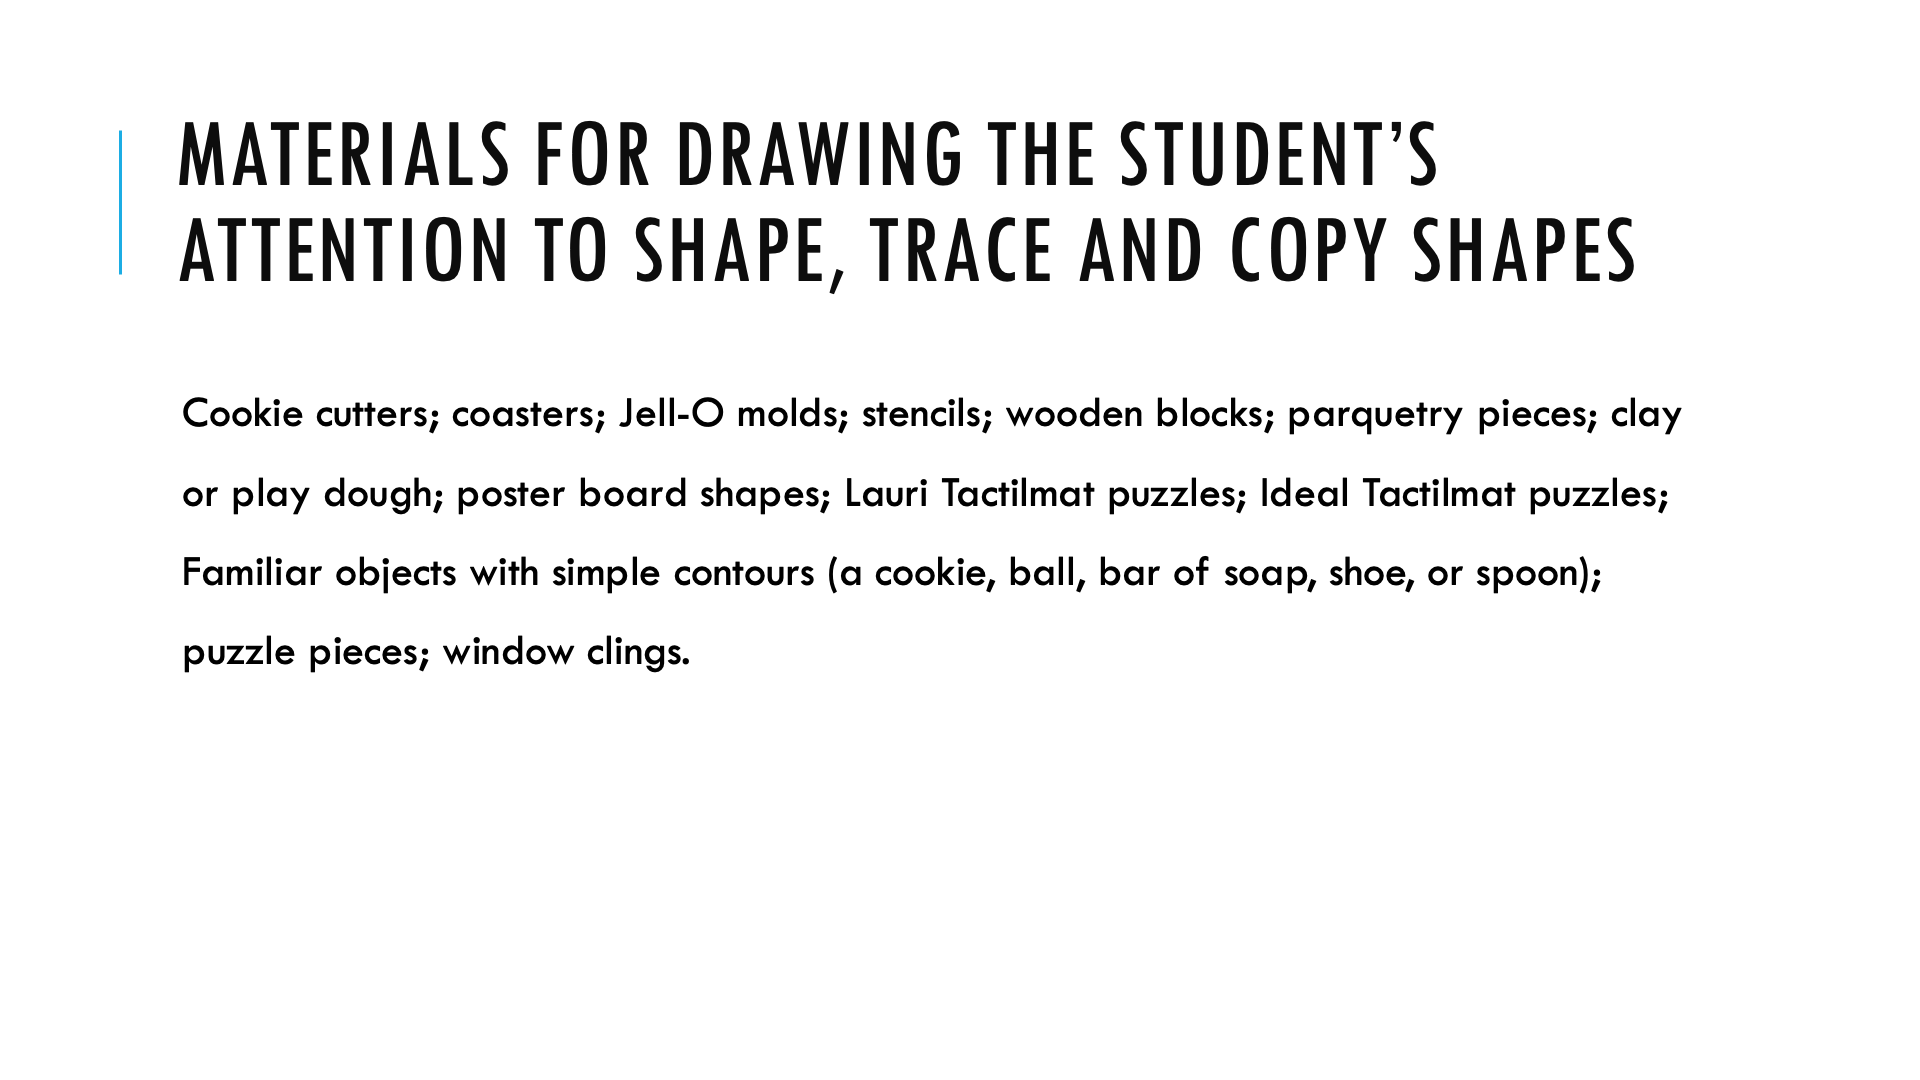 Materials for drawing the student’s attention to shape, trace and copy shapes